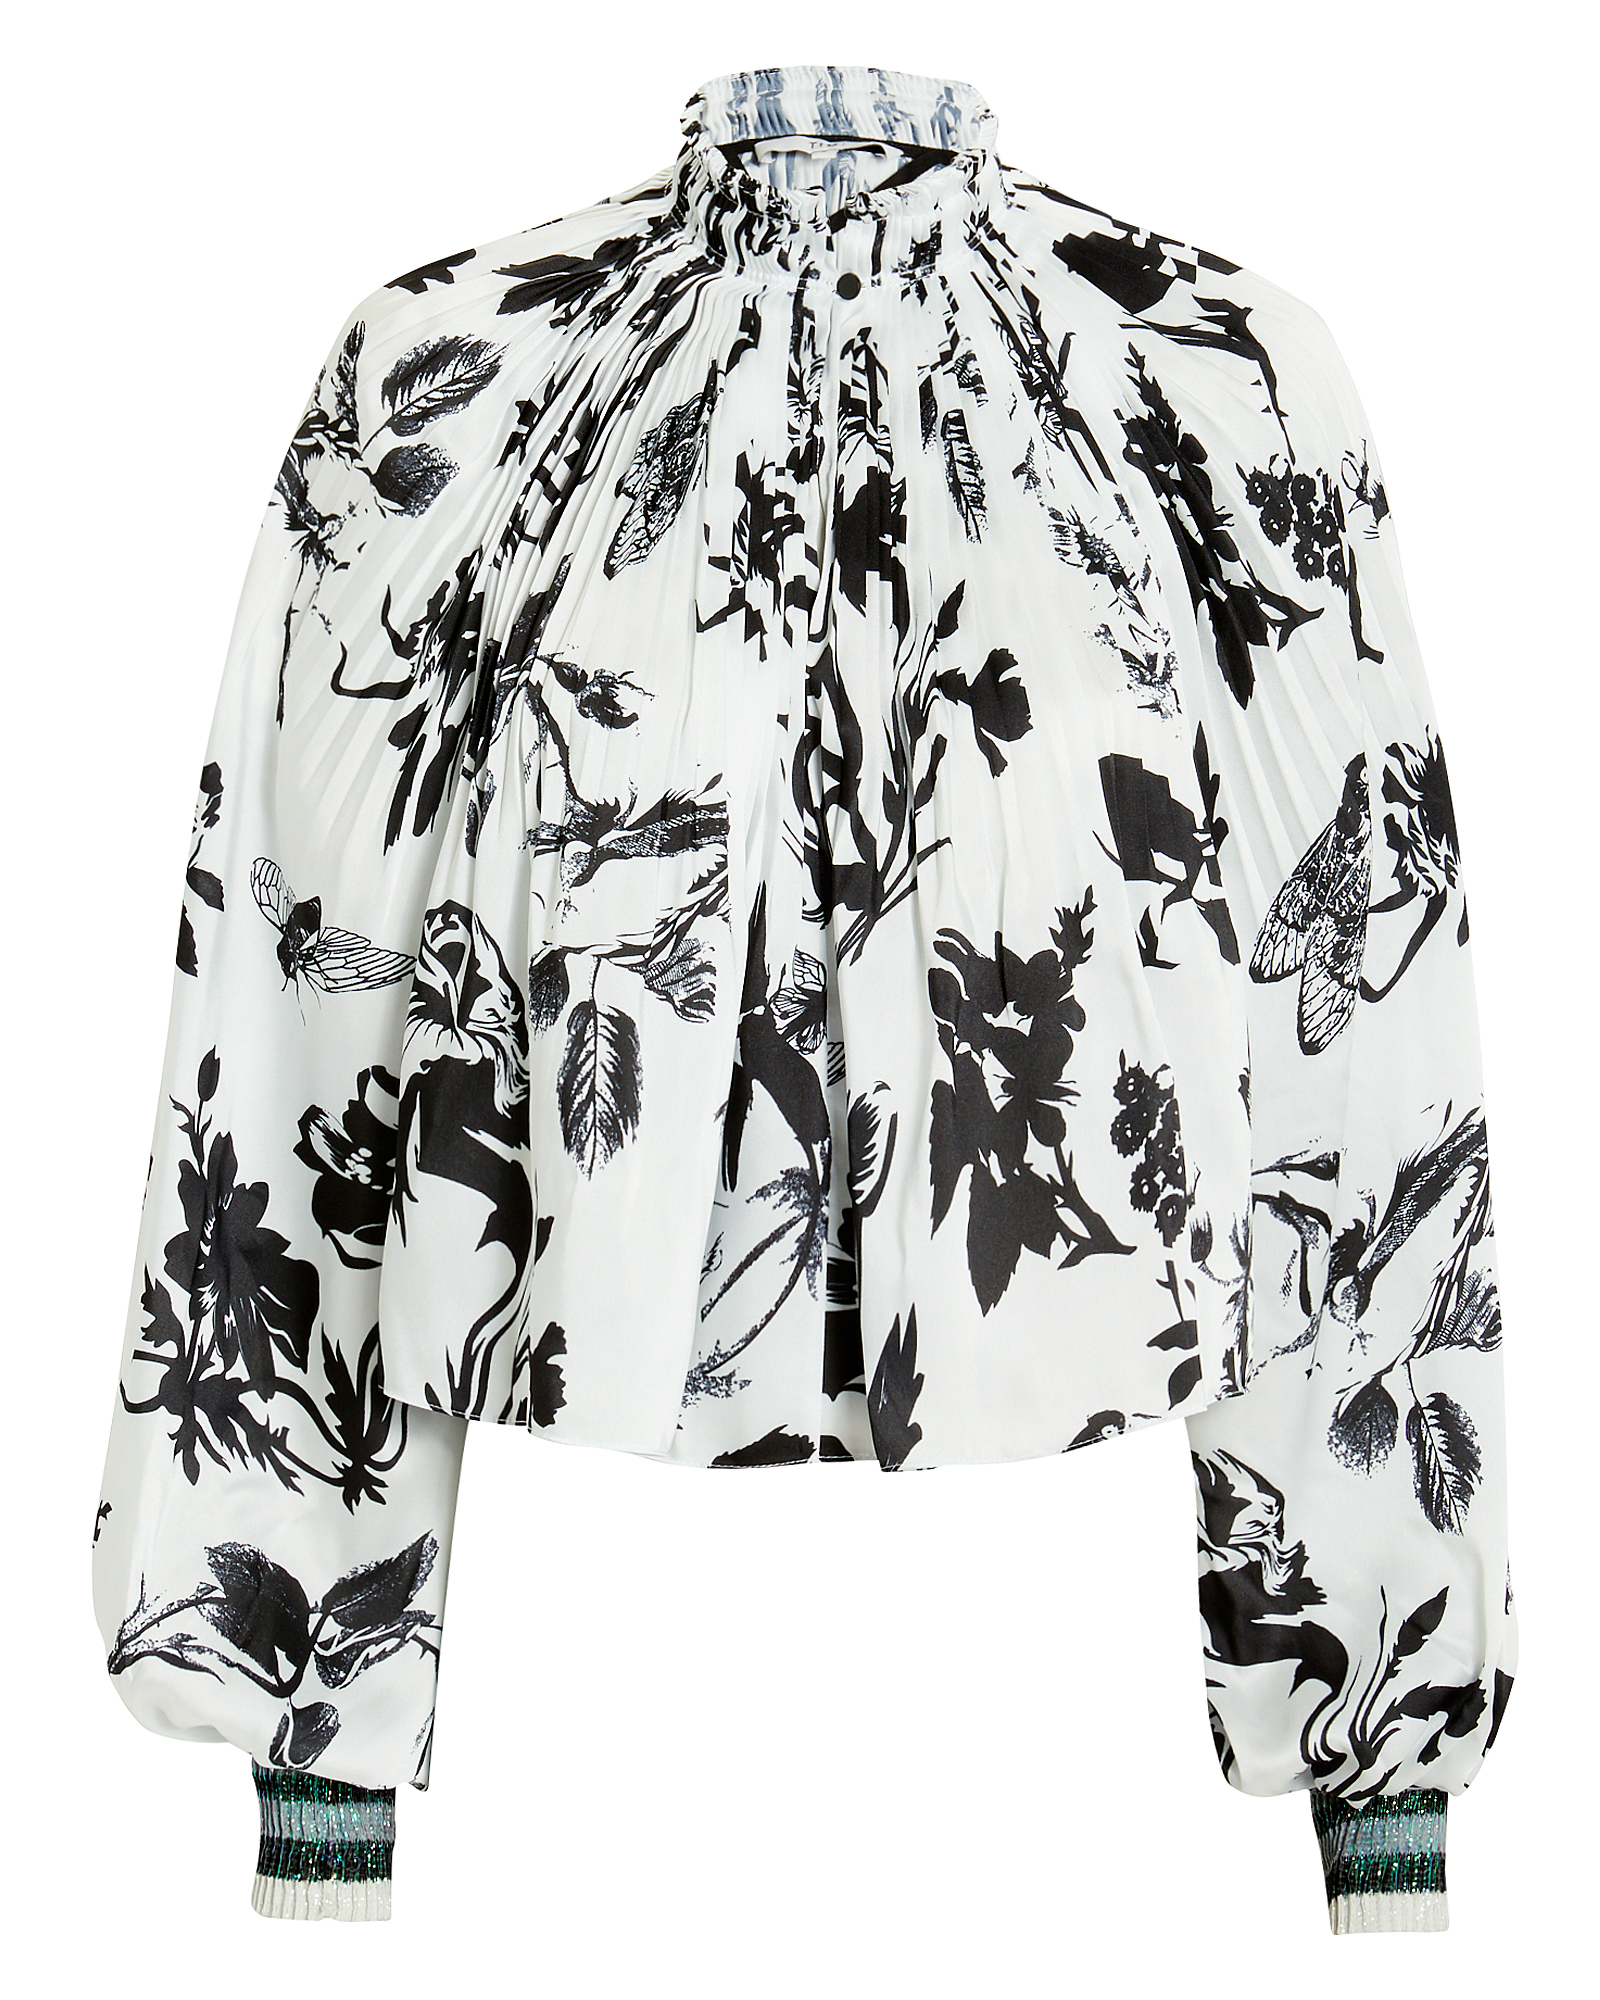 Gothic Floral-Printed Top | INTERMIX®